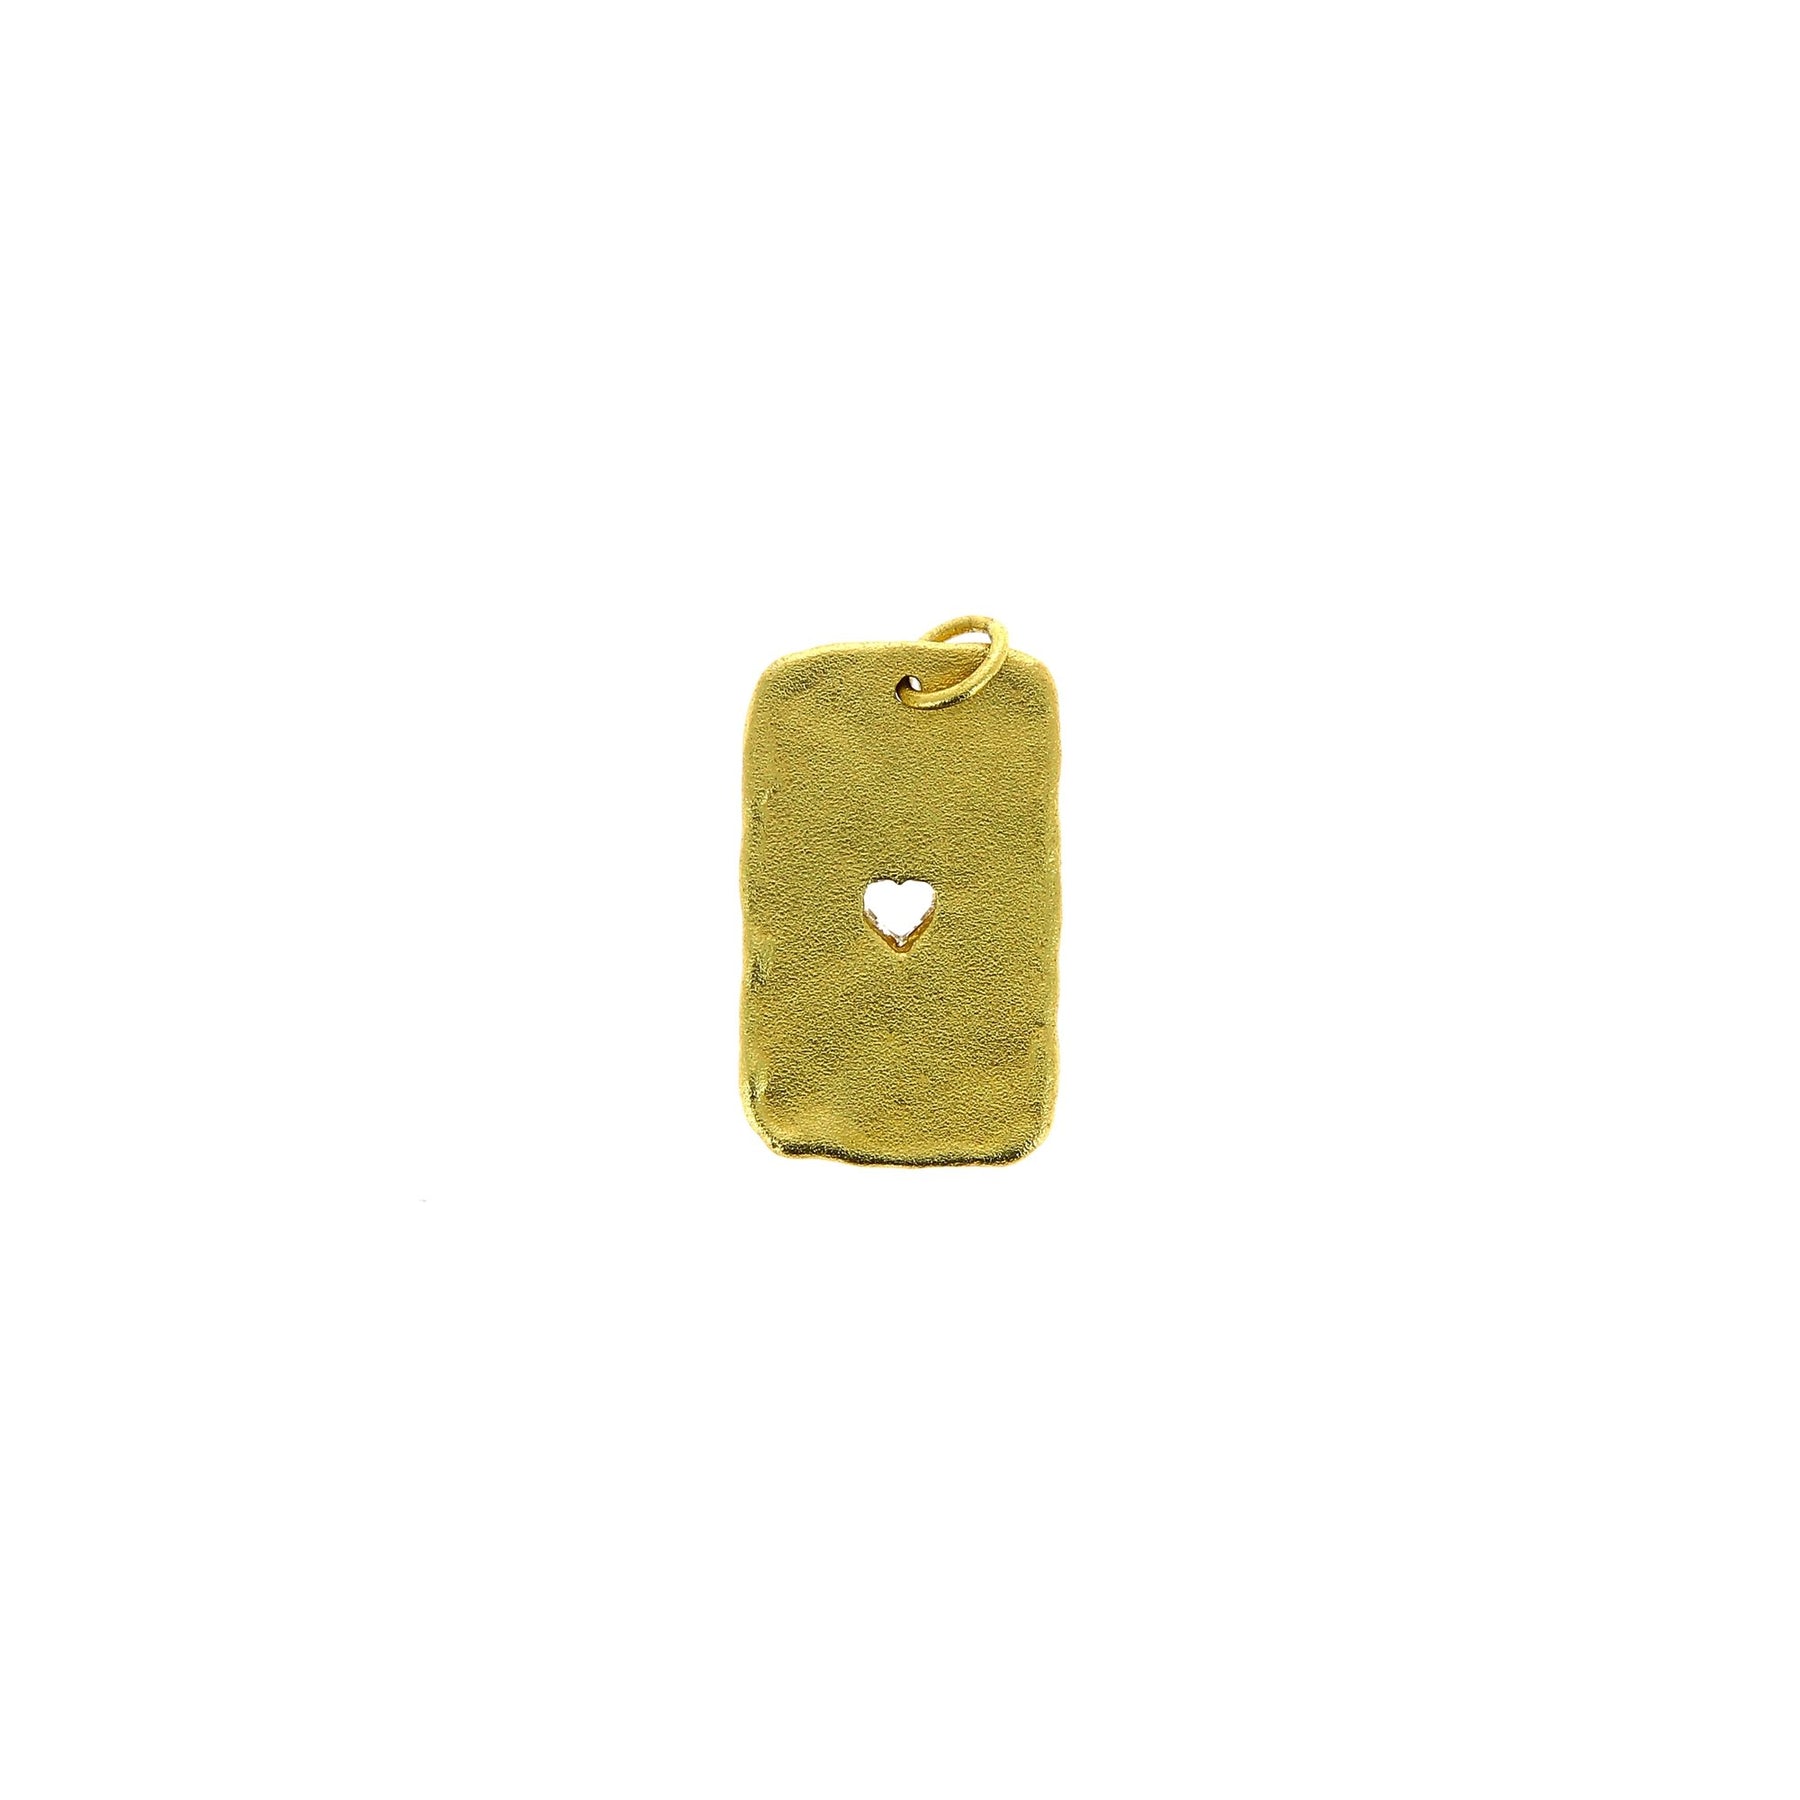 Heart tag charm yellow gold